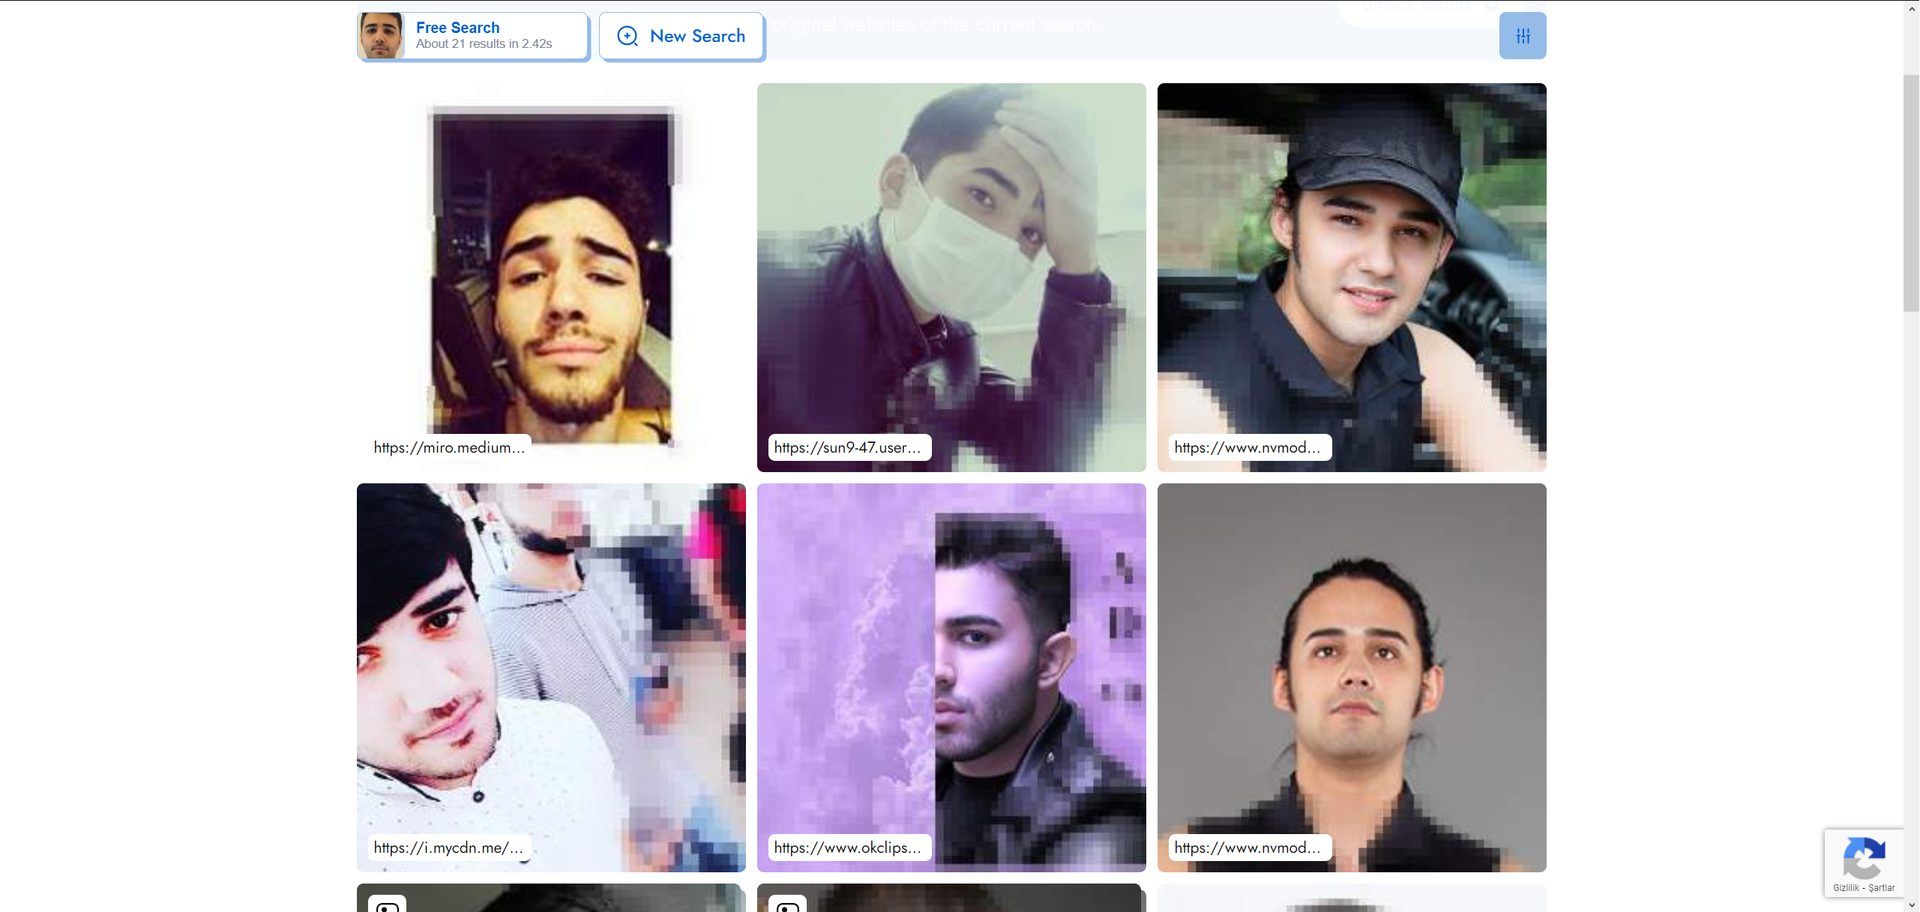 Pimeyes Facial Recognition Search Engine Finds Your Images On The Web.